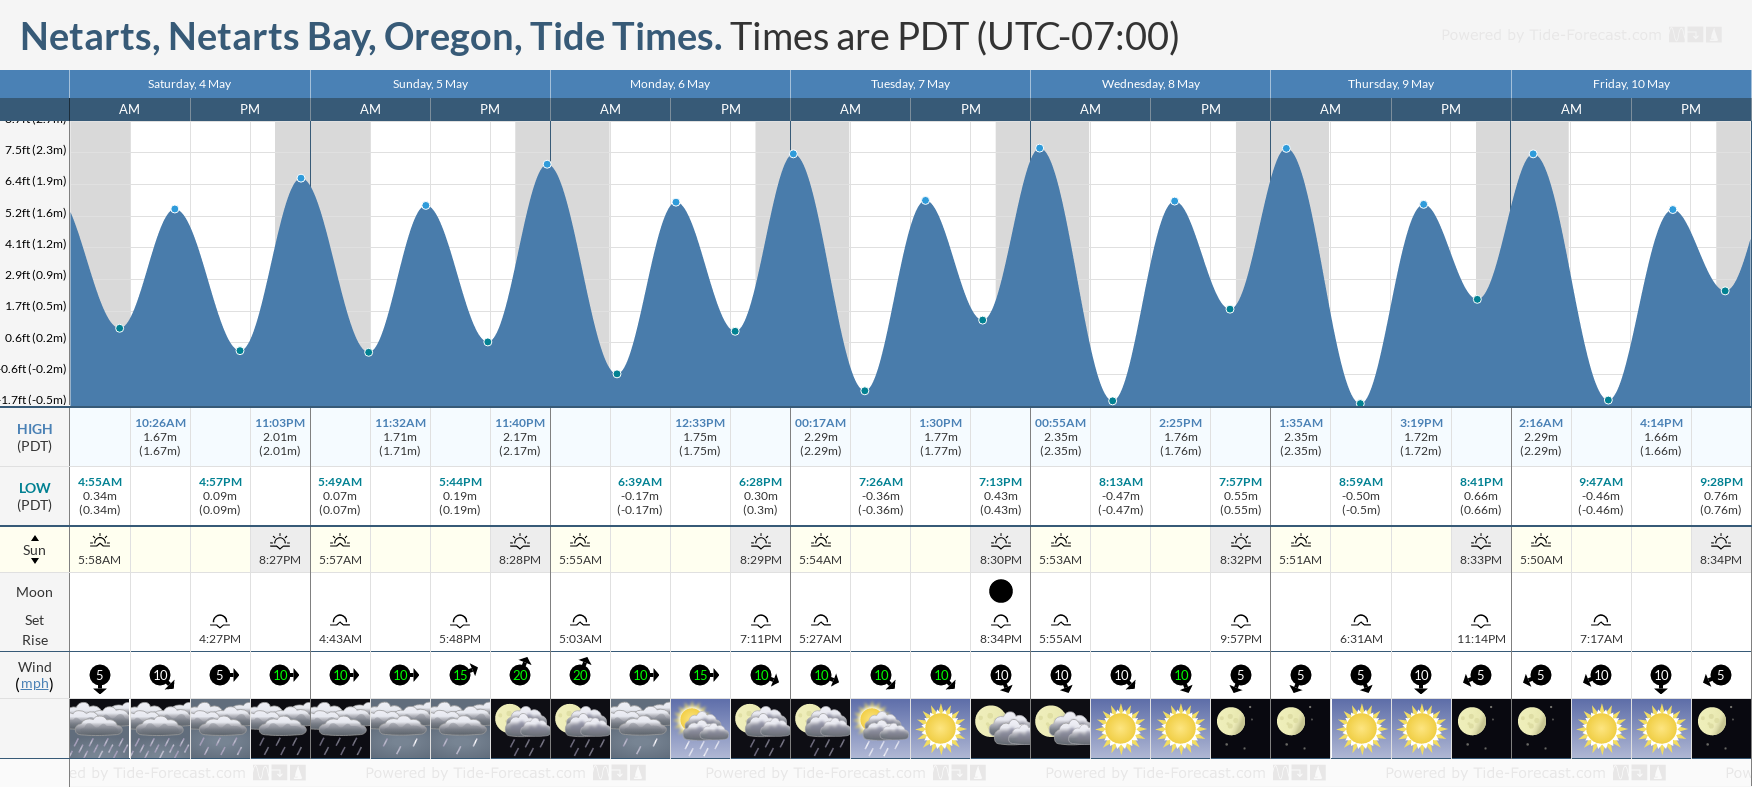 Netarts, Netarts Bay, Oregon Tide Chart including high and low tide times for the next 7 days